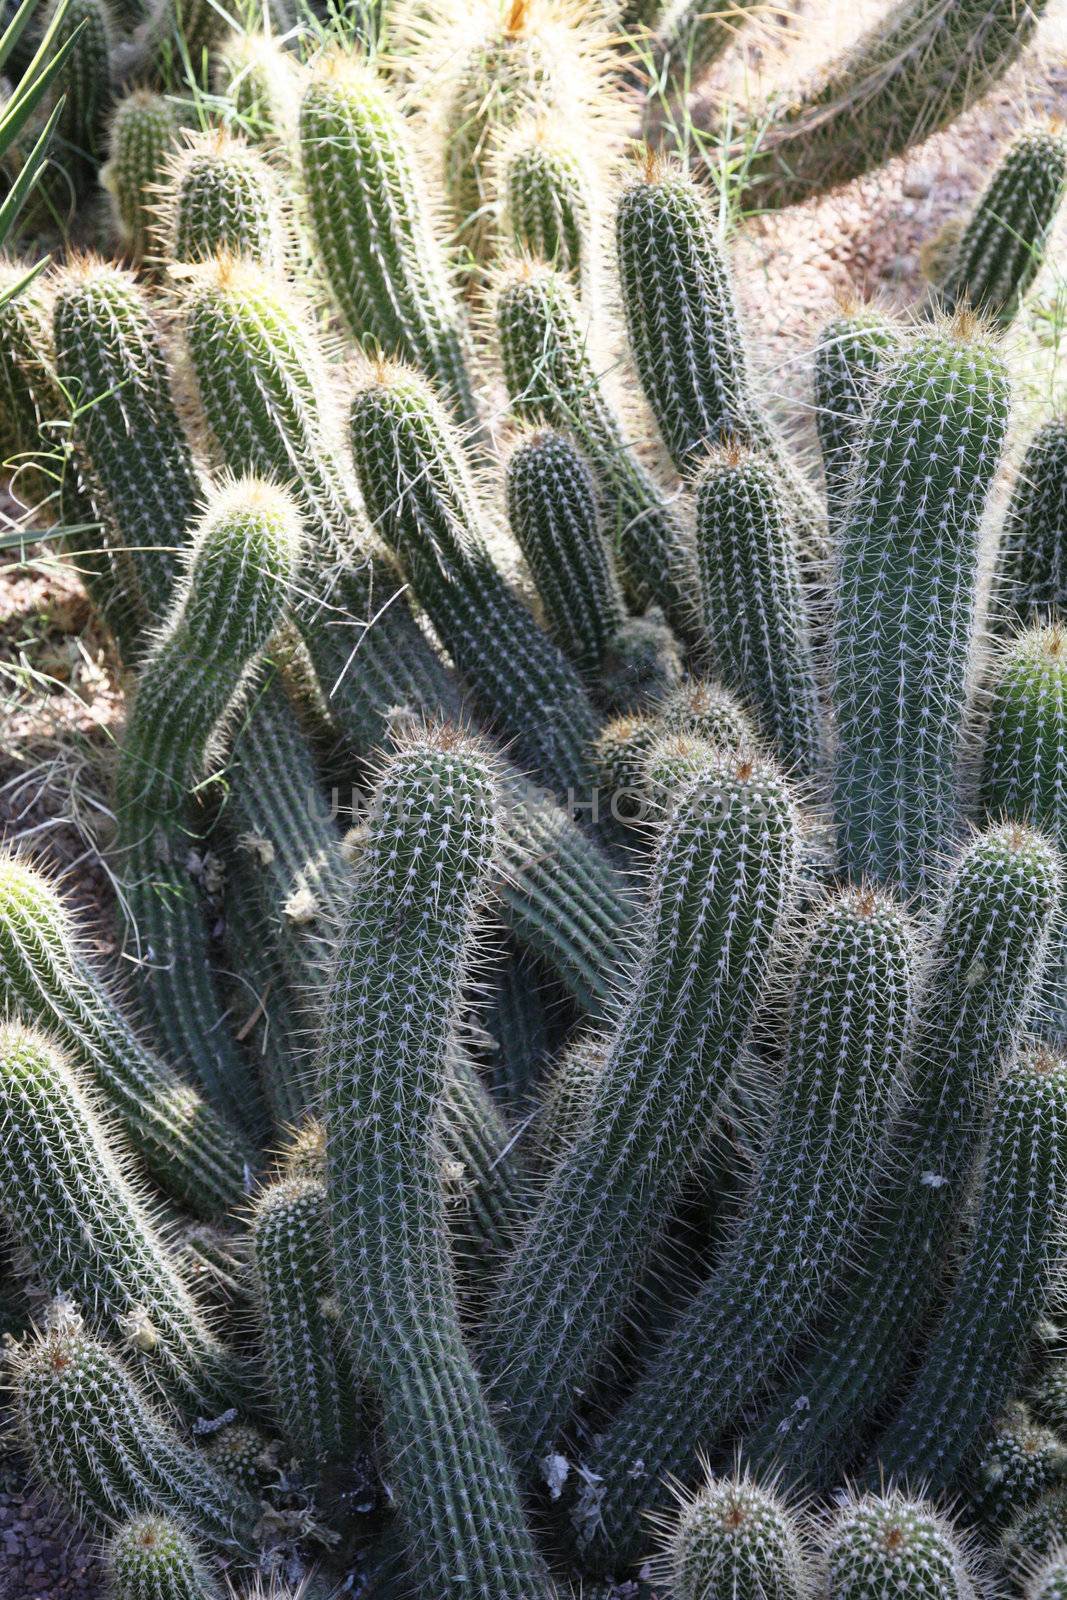 crowd of cactus finger shaped